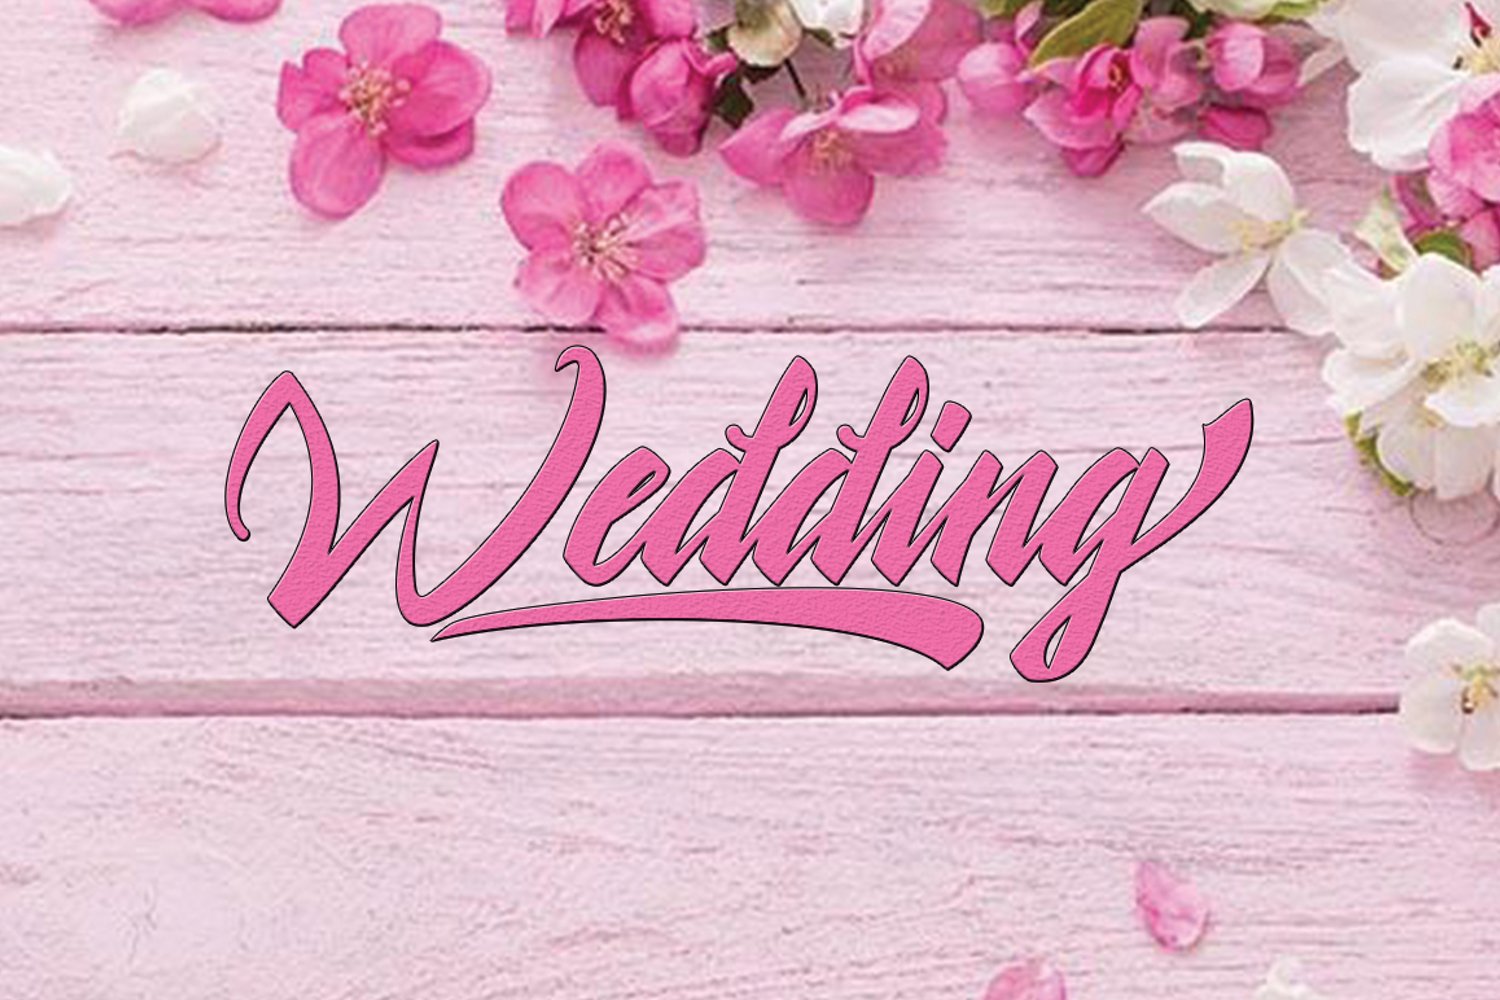 You can use this font for your wedding event.